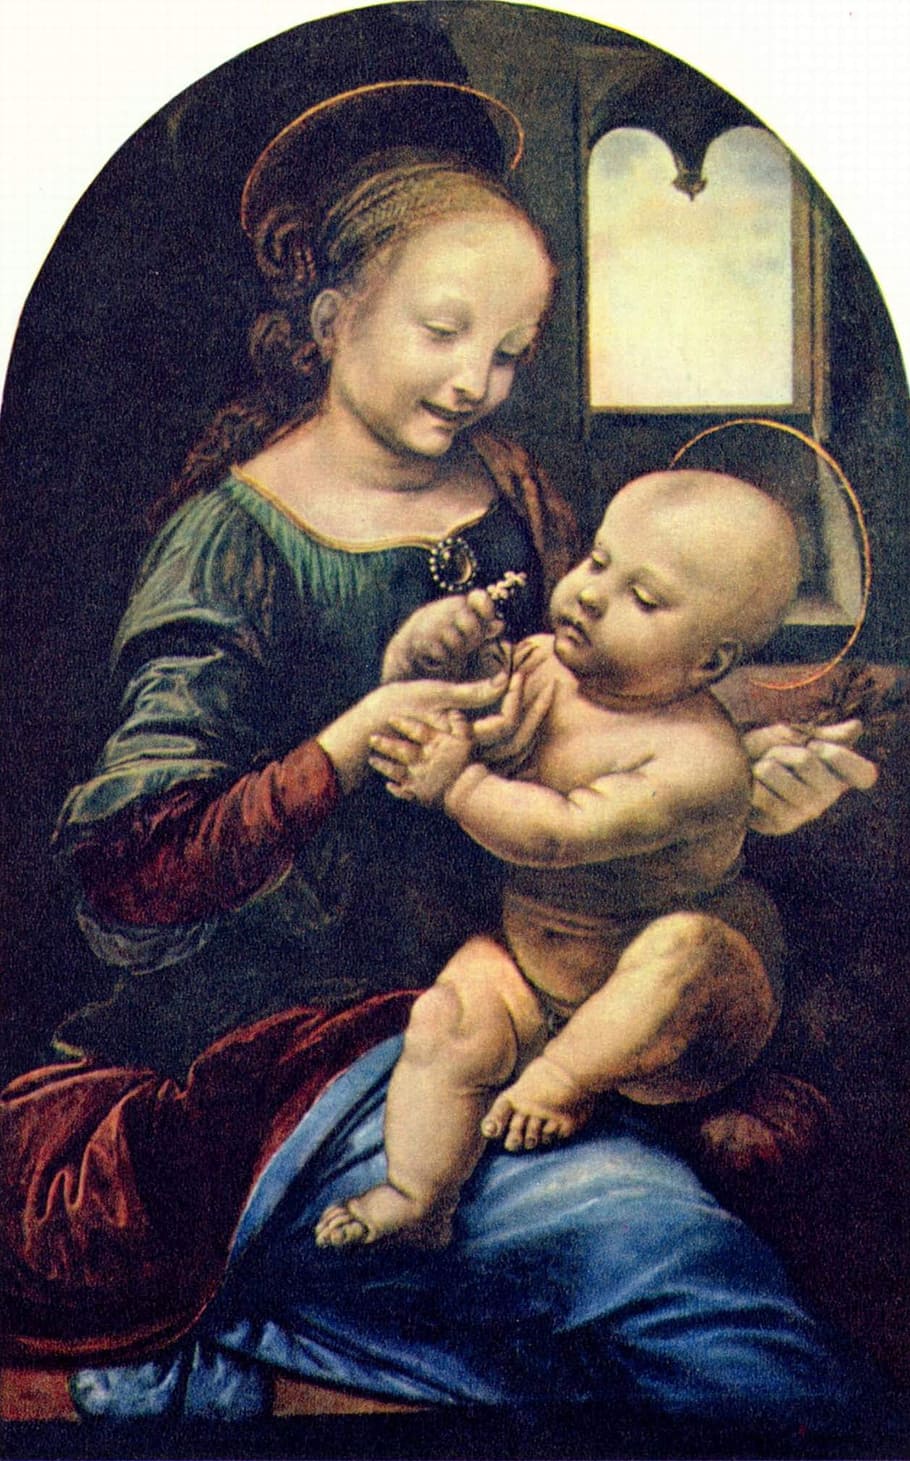 religious painting, the virgin and child, leonardo de vinci, boiler and jesus, 1478-1482, oil on wood, youth painting leonardo, mother and son, emotion, christ